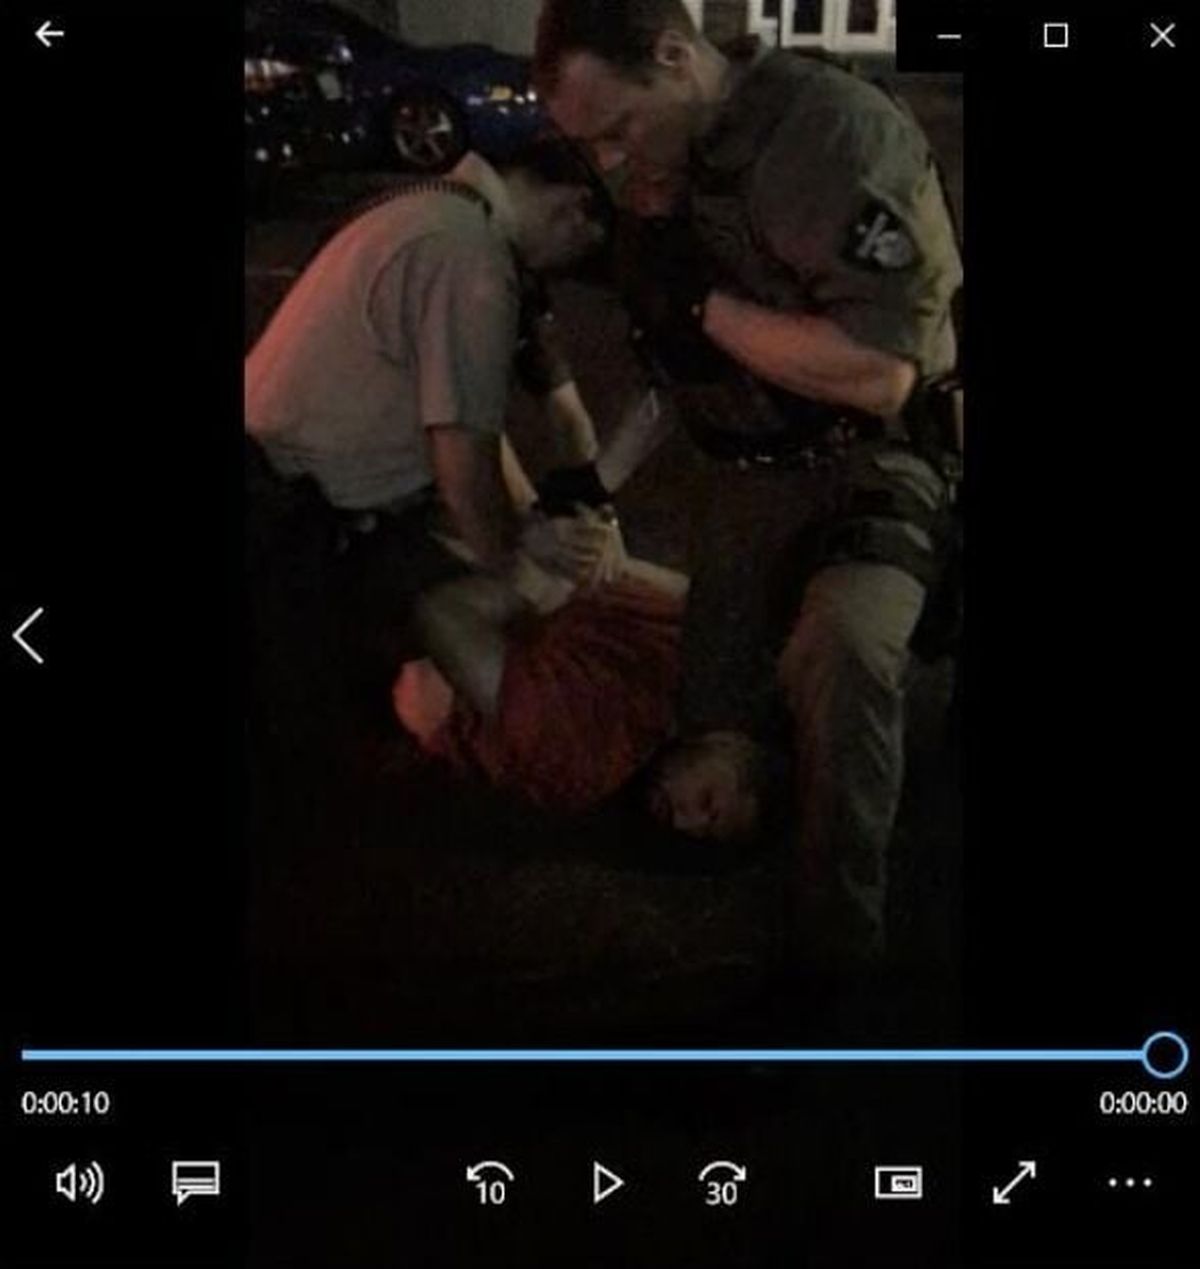 A still of a video captured by a woman in August 2019 shows Spokane County Sheriff’s deputies detaining then-23-year-old Darnai L. Vaile outside a bar in Spokane Valley.  (Washington Court of Appeals Division III)